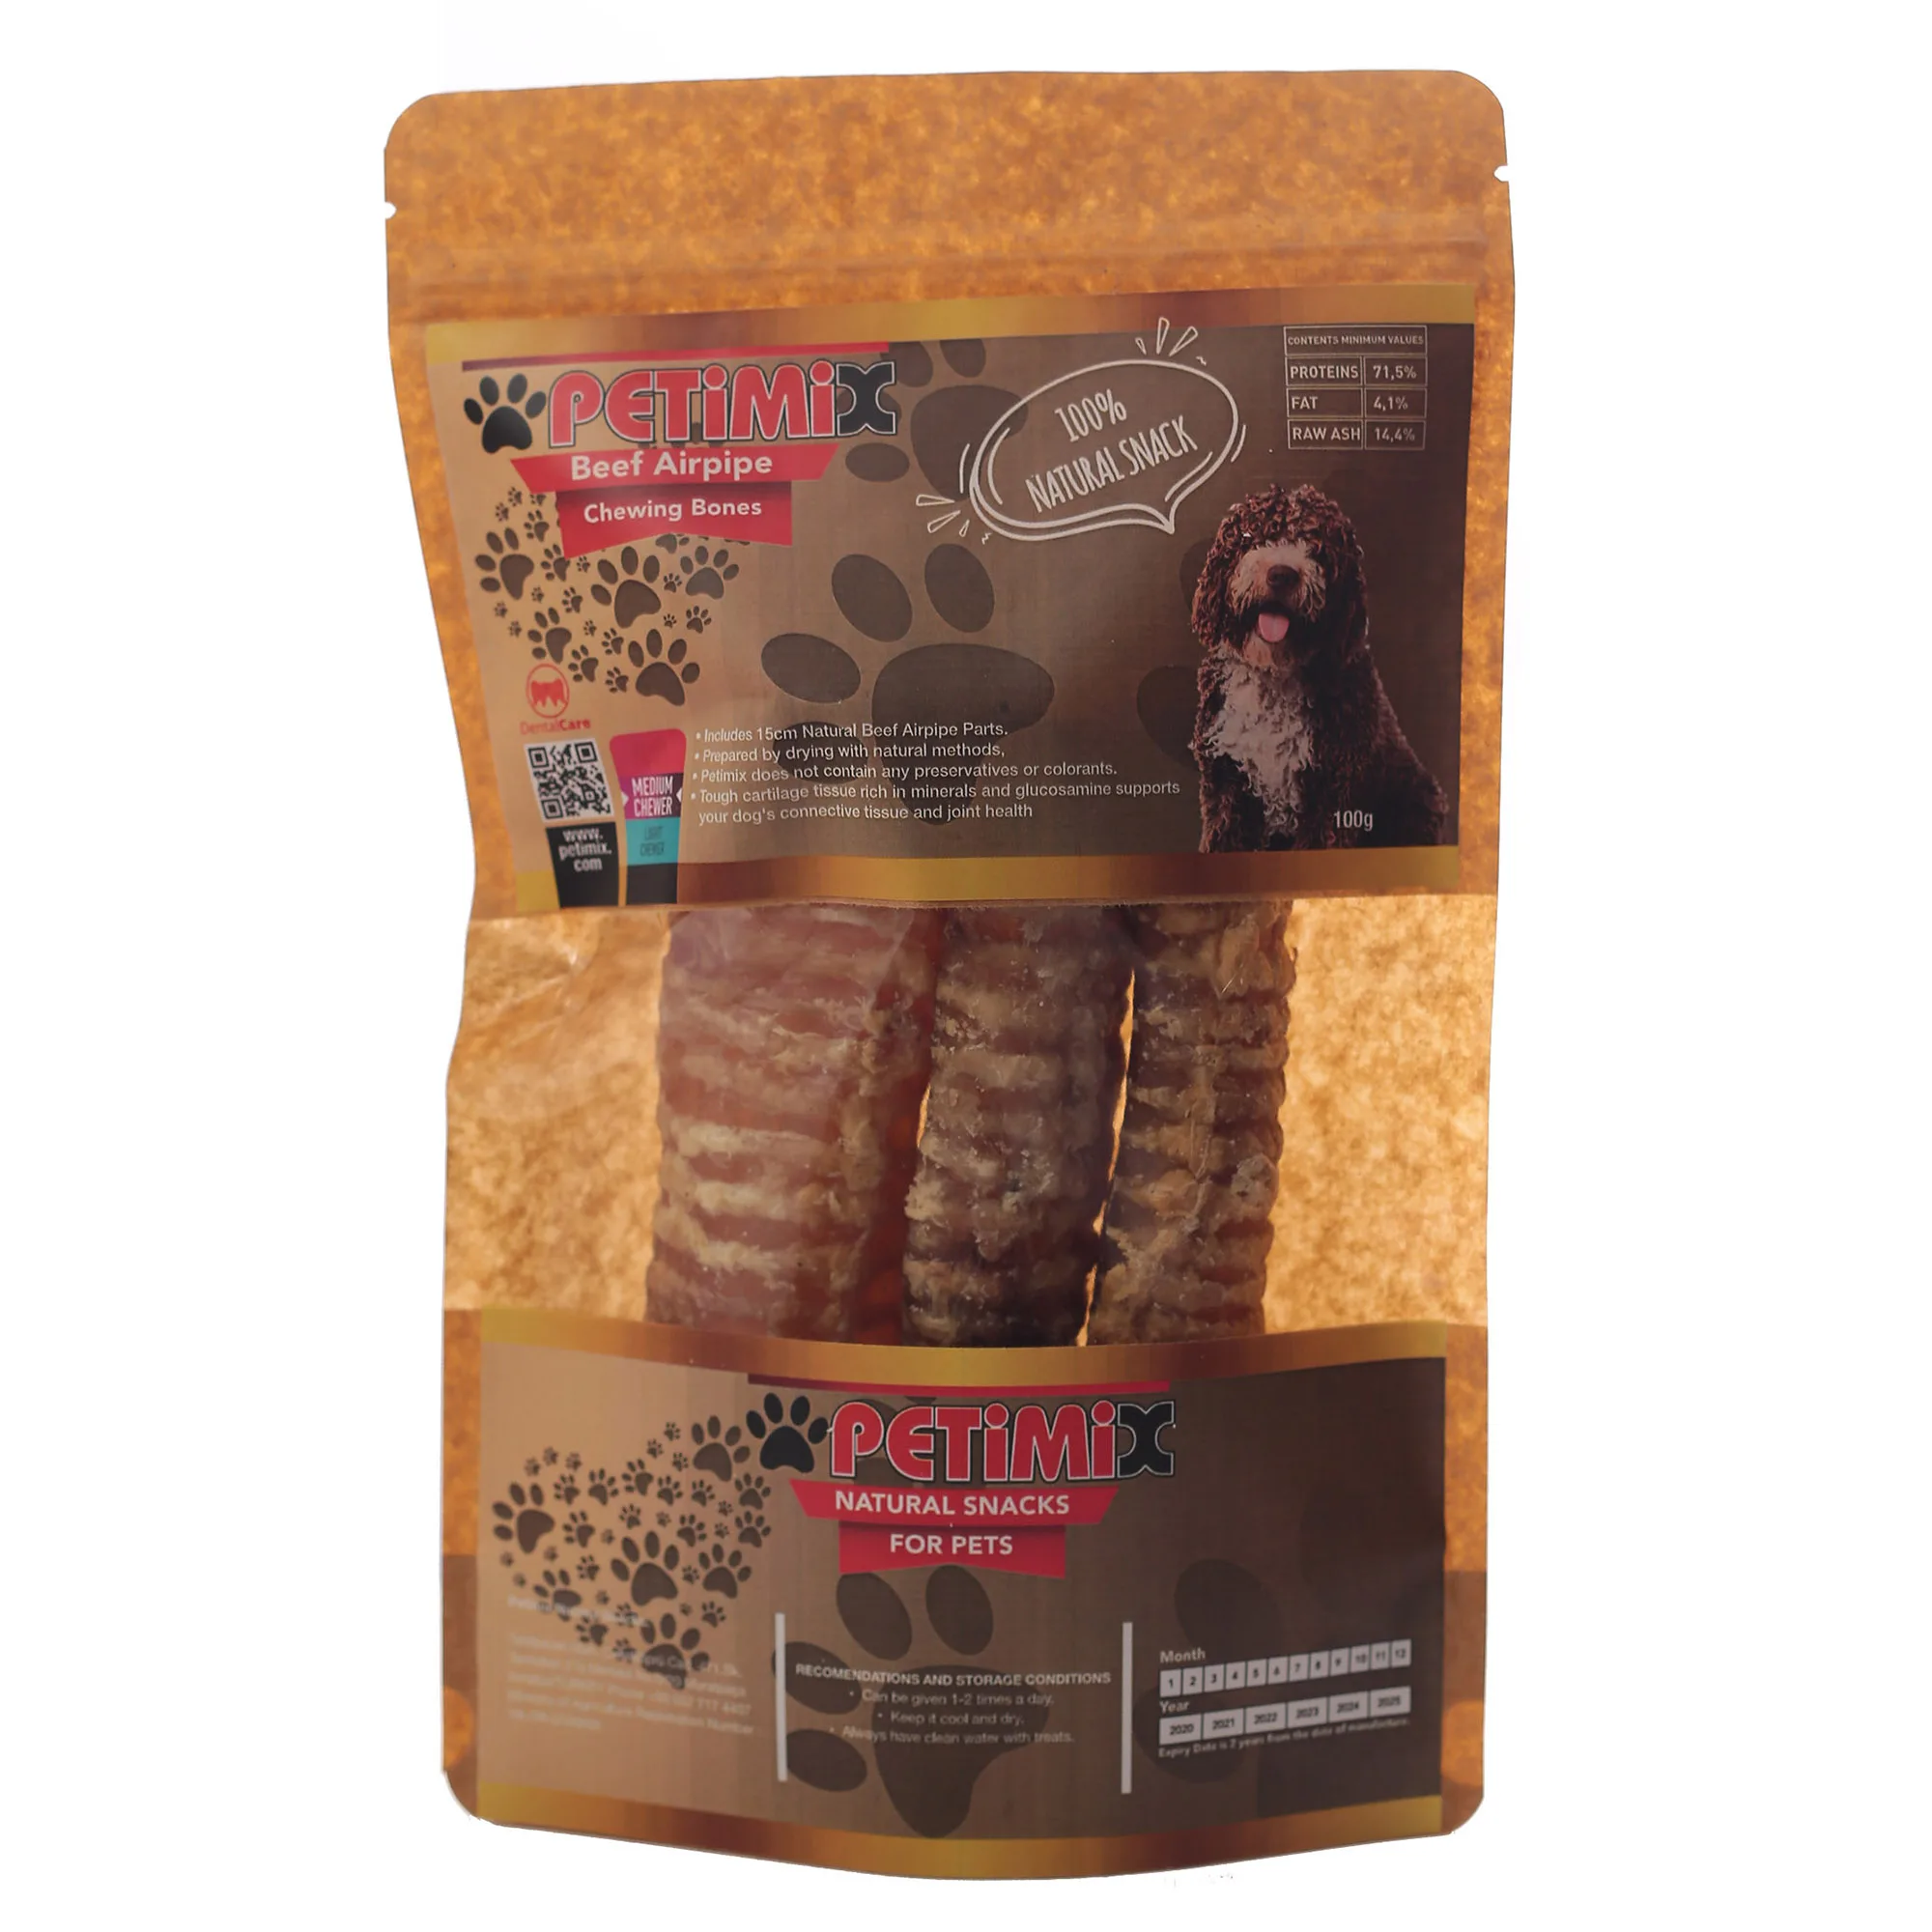 

Petimix Beef Airpipe Chewing Bones Dog Treat Naturel Snacks for Pets Dental Care 100g